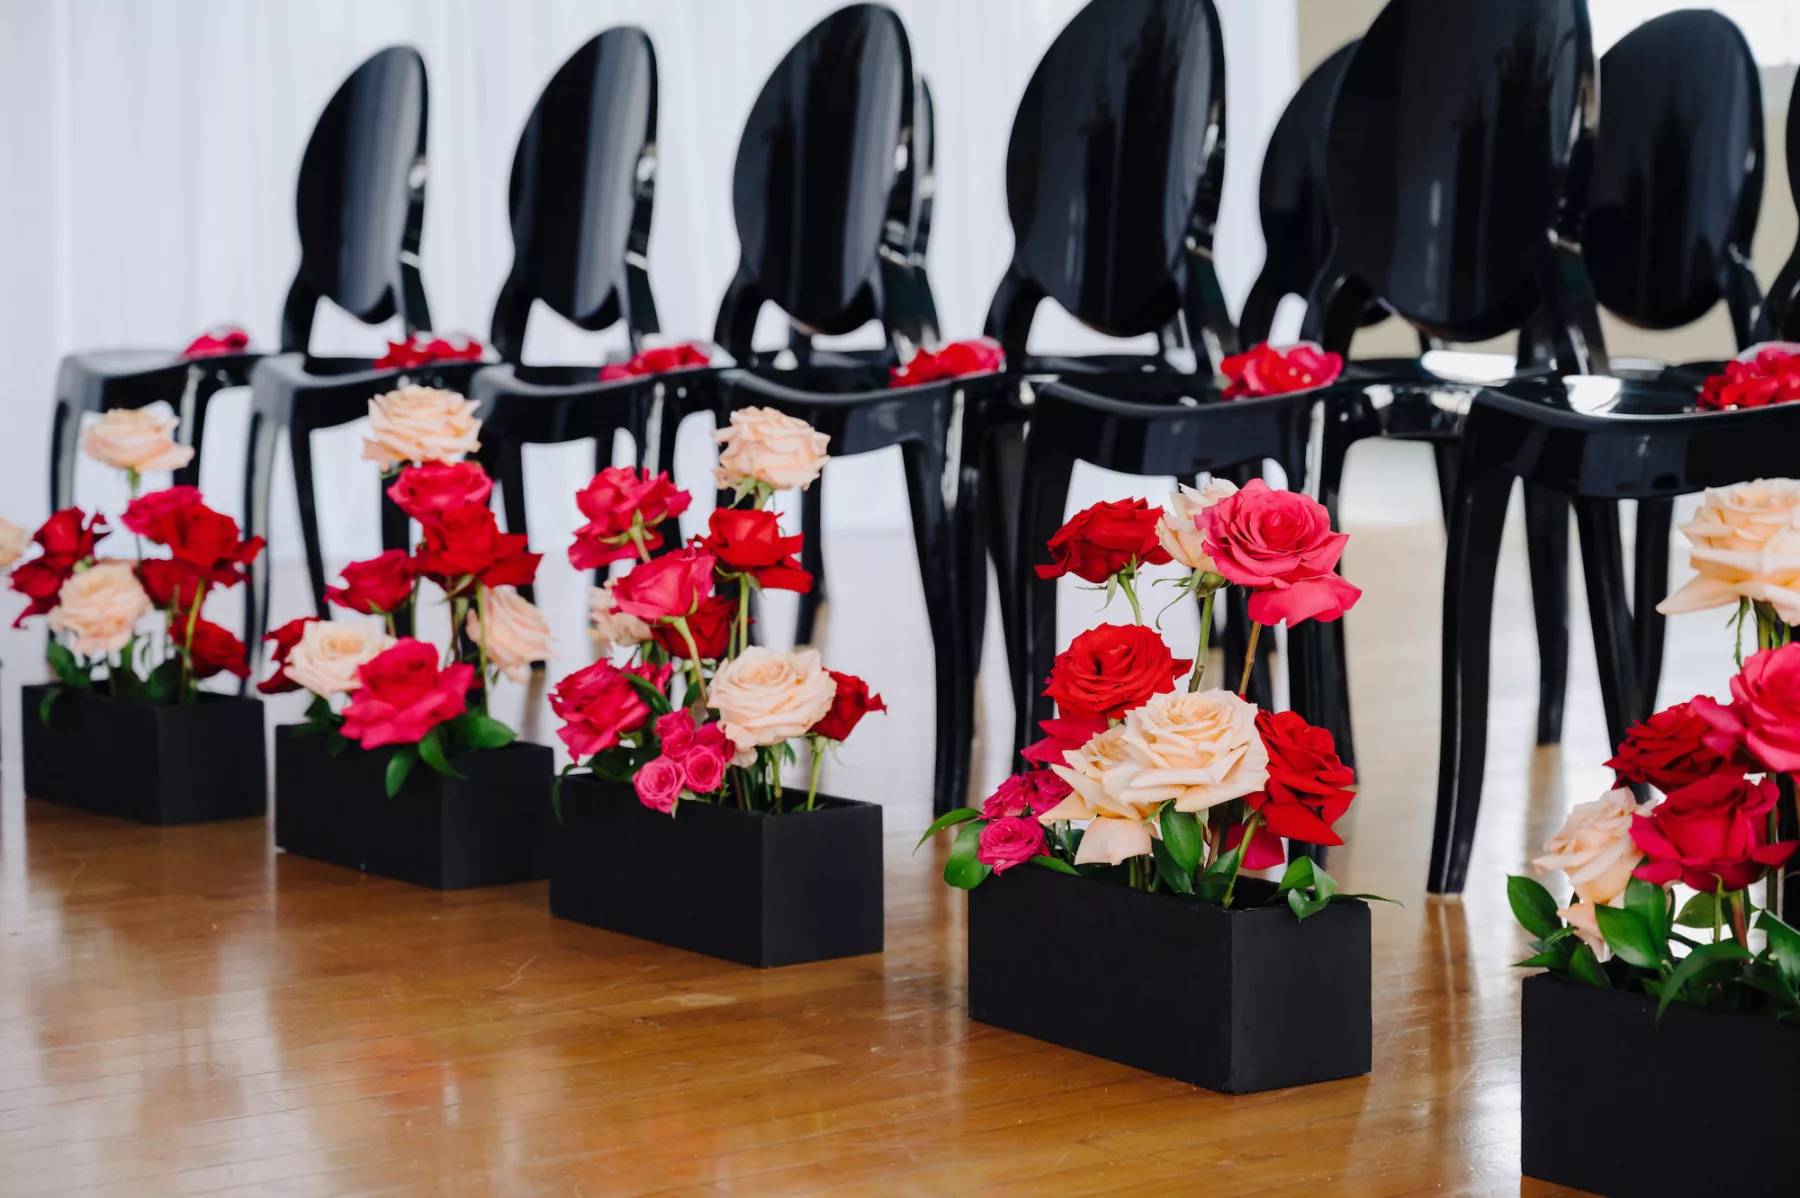 Modern Black and Pink Wedding Ceremony Aisle Decor Ideas | Bold Pink and Red Roses in a Black Flower Box | Black Ghost Chairs | Tampa Bay Florist Save The Date Florida | Ybor Planner Eventfull Weddings | Rentals A Chair Affair